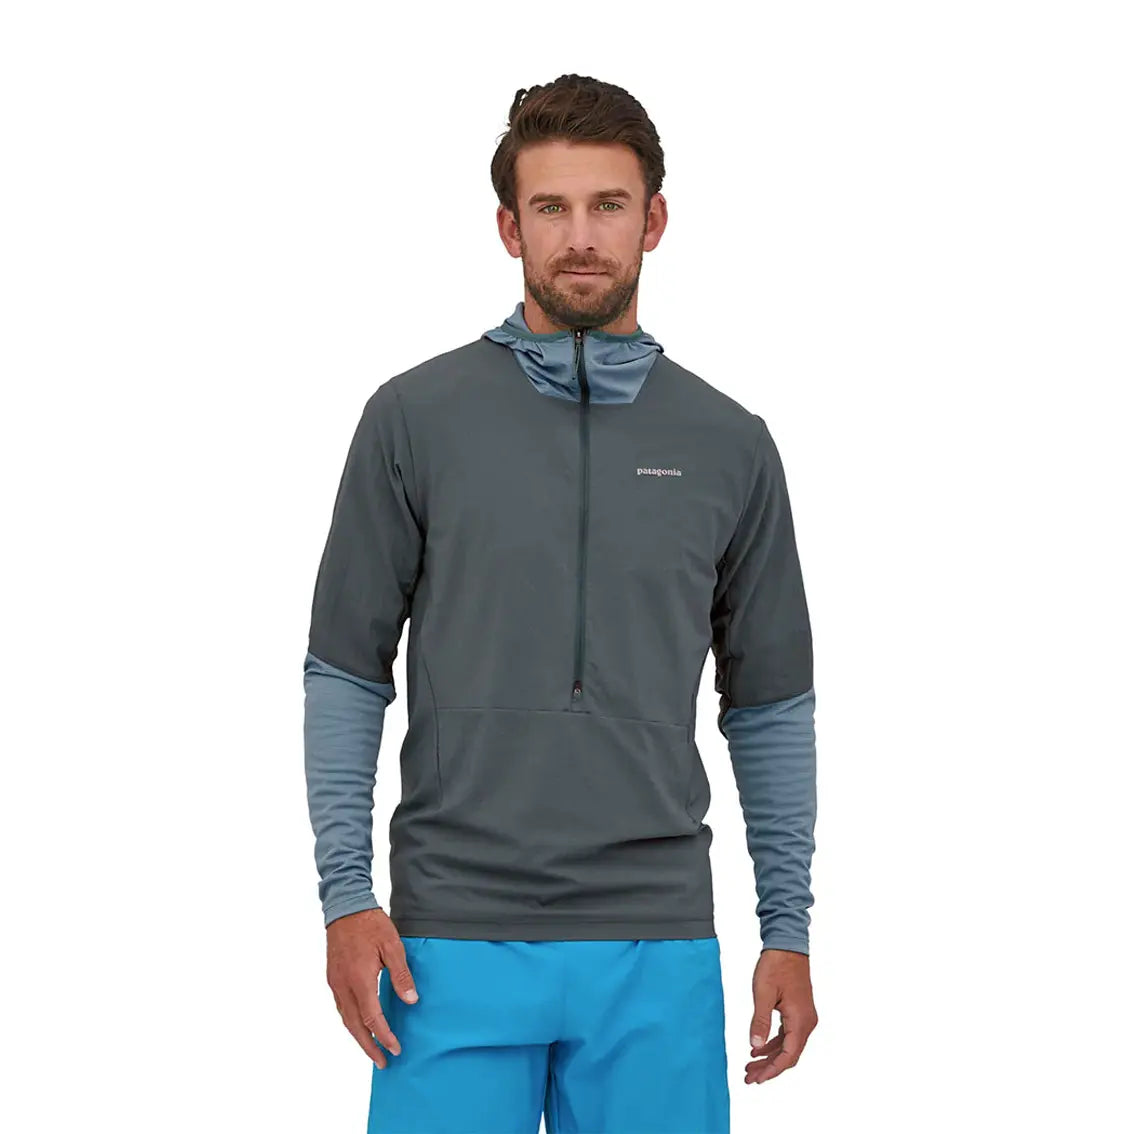 Mens Patagonia Airshed Pro Pullover - Plume Grey